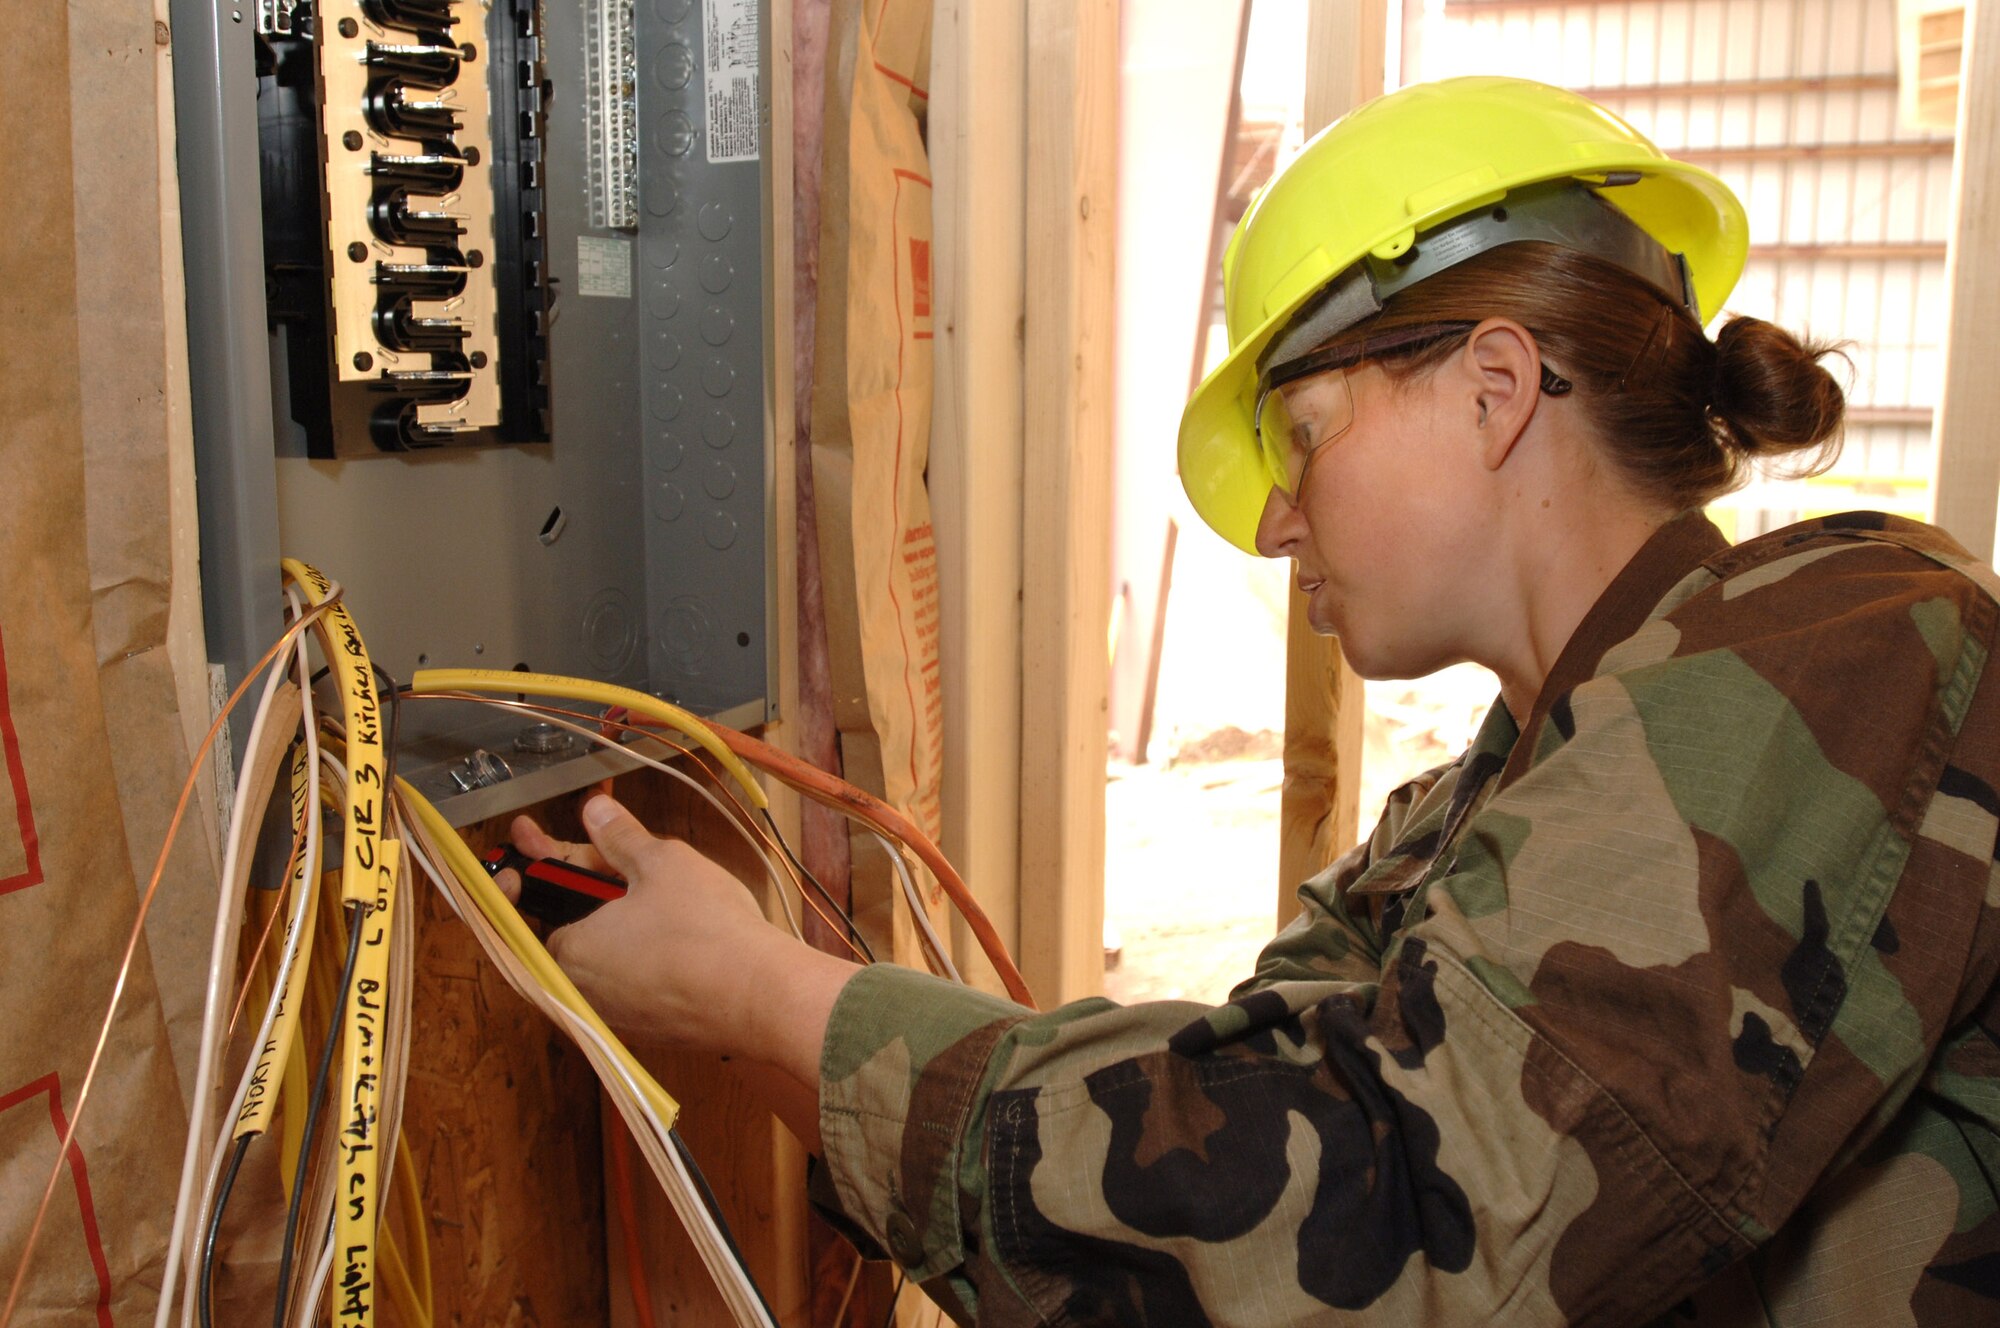 Air Force Academy Cadet 2nd Class Holly Bigalow installs wiring in a house being built by cadets during the Field Engineering and Readiness Laboratory course at the Academy.  The course exposes cadets to several aspects of civil engineering, including heavy equipment operation, steel bridge construction, designing and pouring concrete beams and paving portions of a road. (U.S. Air Force photo/Mike Kaplan)